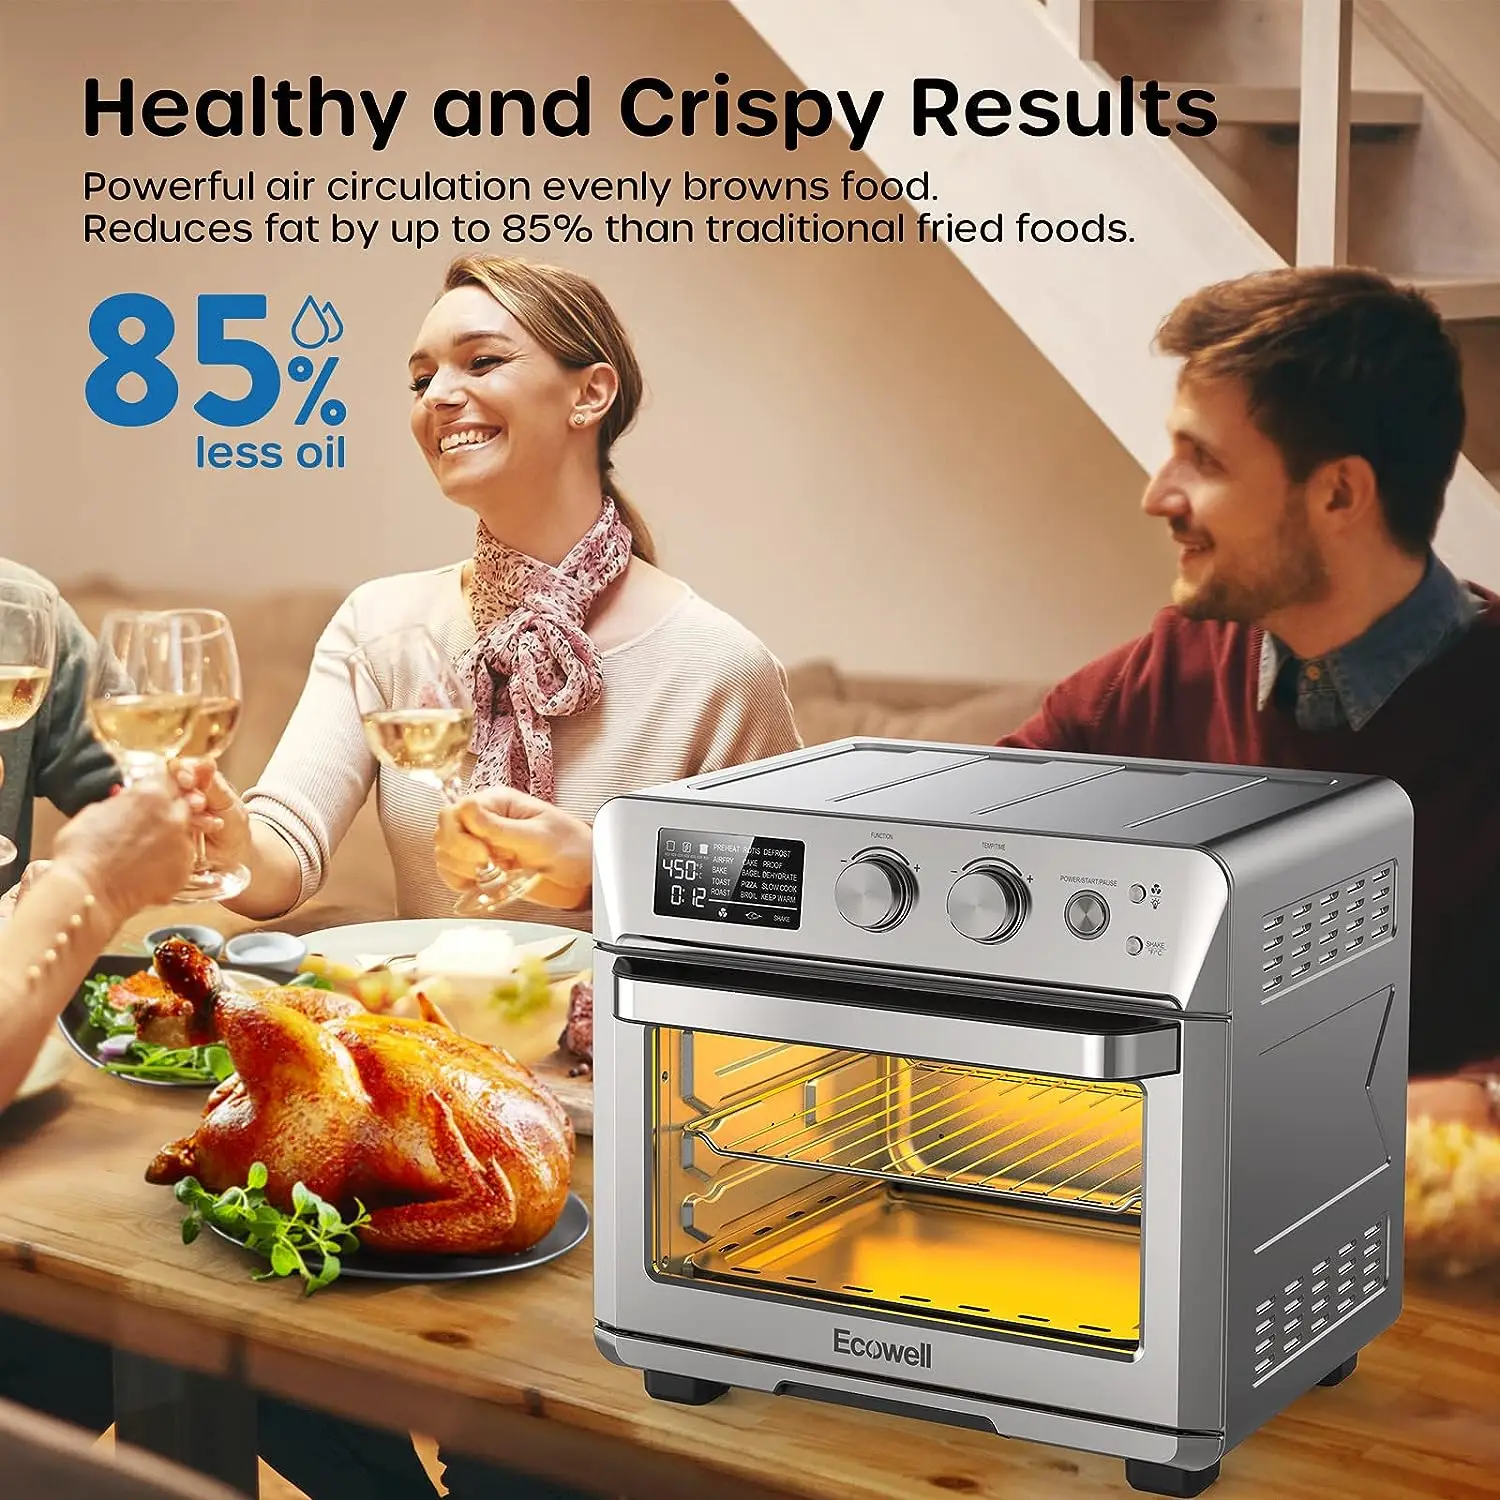 https://ae01.alicdn.com/kf/S8261253955c14e8f96086f566ce4a675O/Fryer-Toaster-Oven-Combo-15-in-1-Airfryer-Toaster-Ovens-Countertop-26-4-QT-Stainless-Steel.jpg